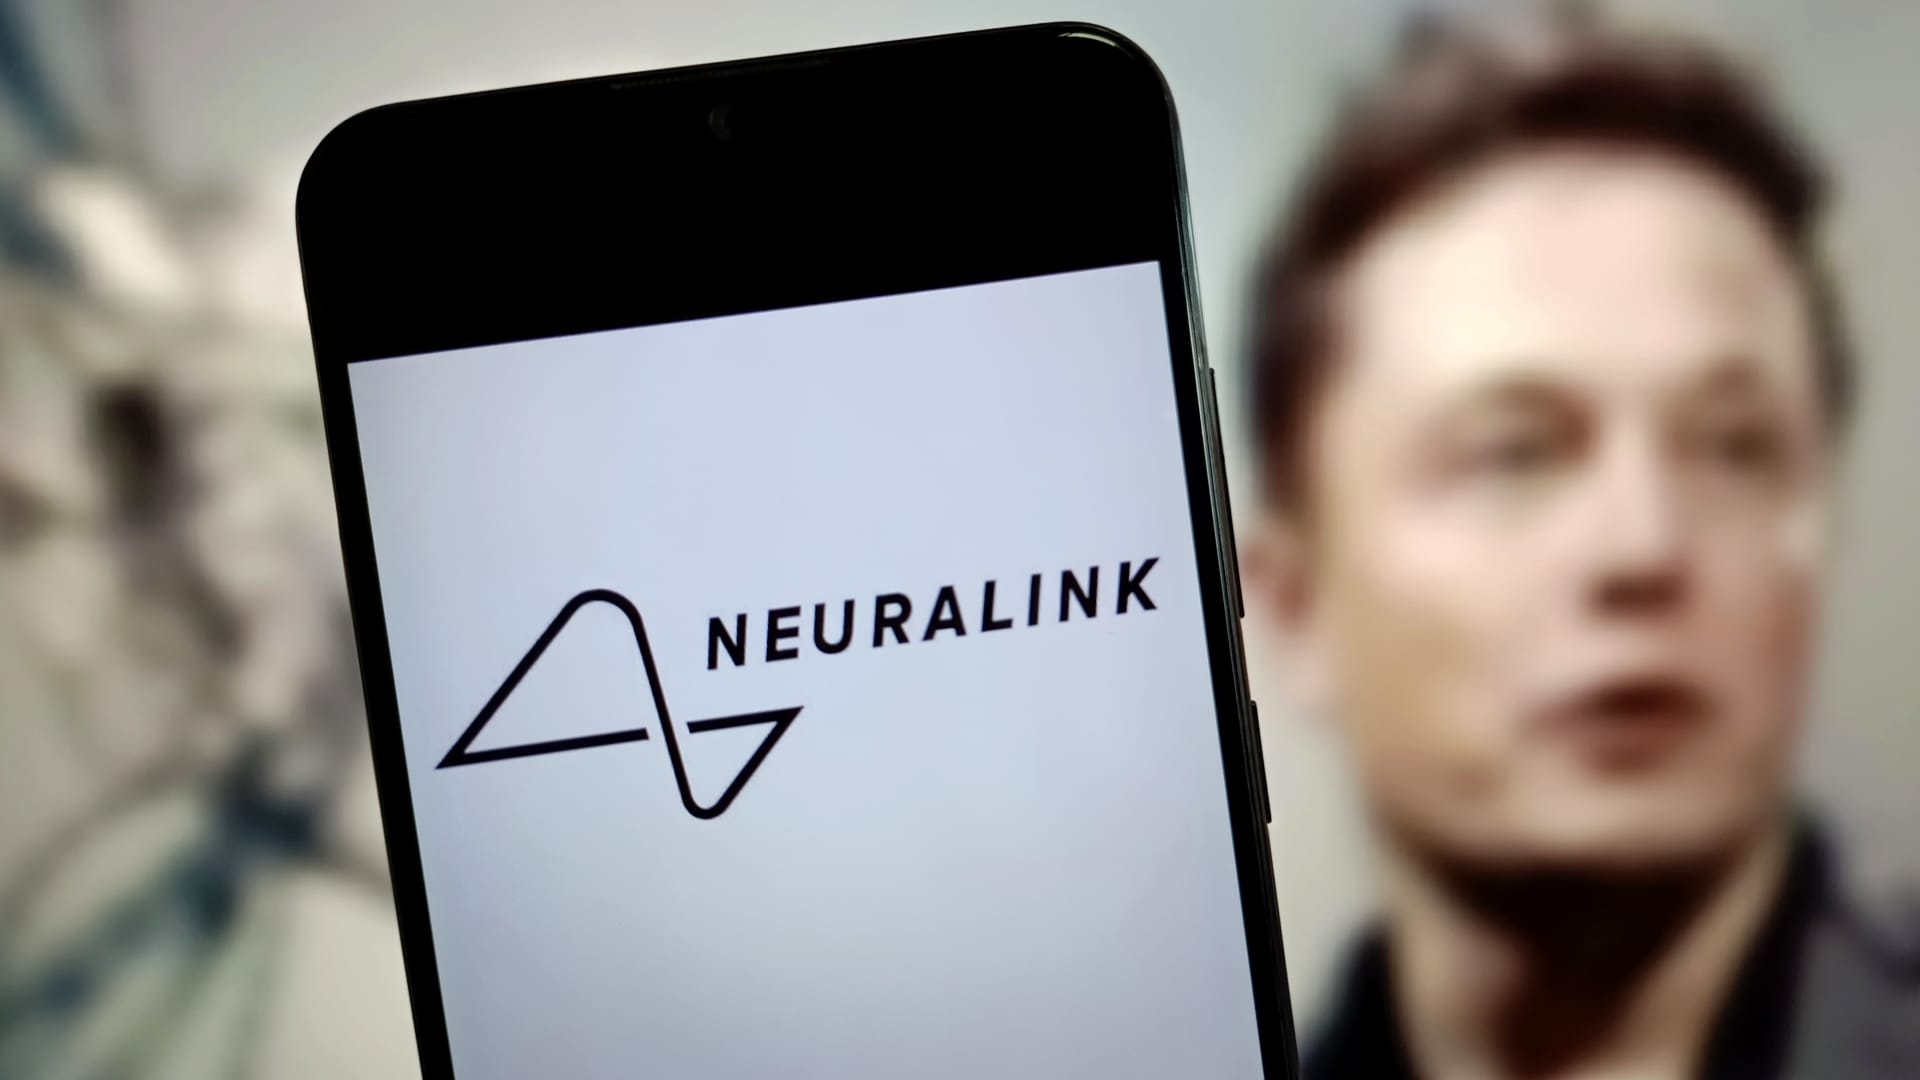 Elon Musk's Neuralink implants brain tech in human patient for the first time - CNBC